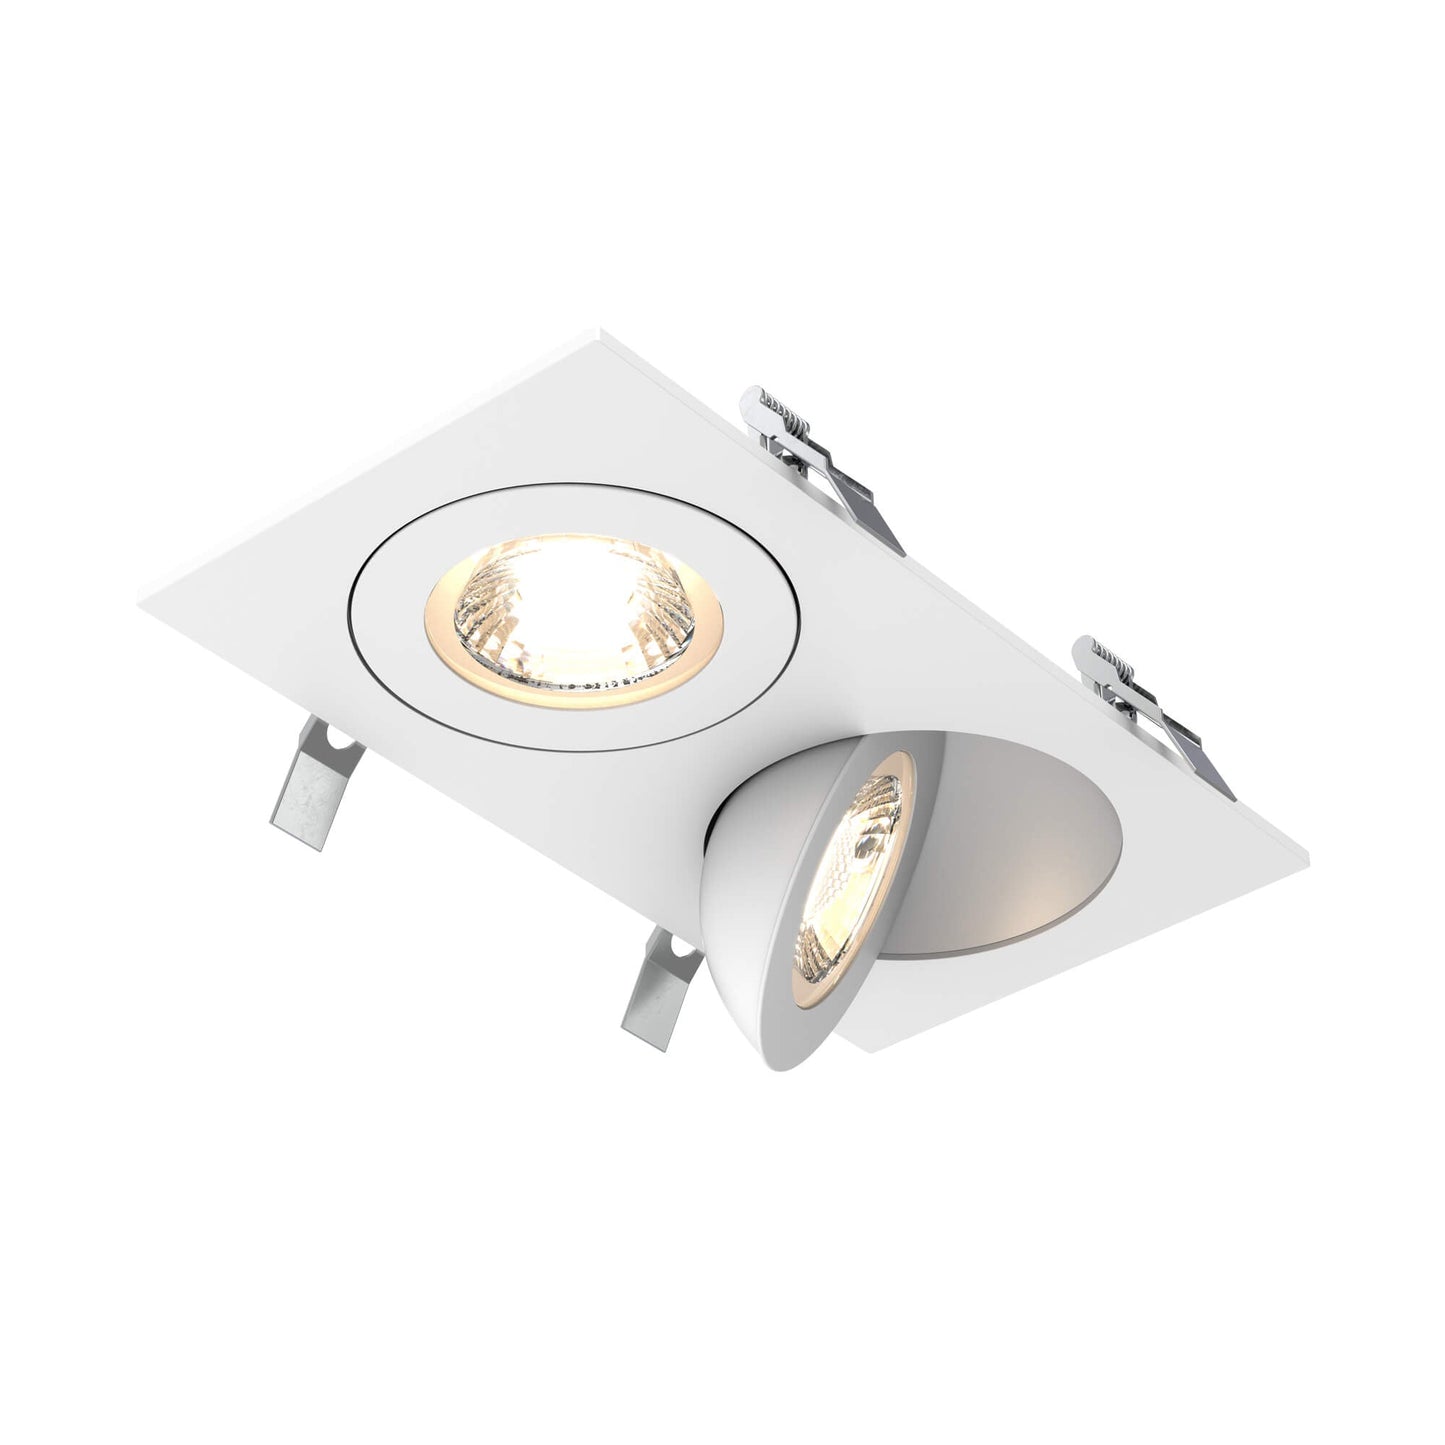 DALS-FGM4-CC-DUO-WHDals Lighting FGM4SQ-CC-DUO Double 4″ 18W LED Pivoting Gimbal Recessed Selectable CCT